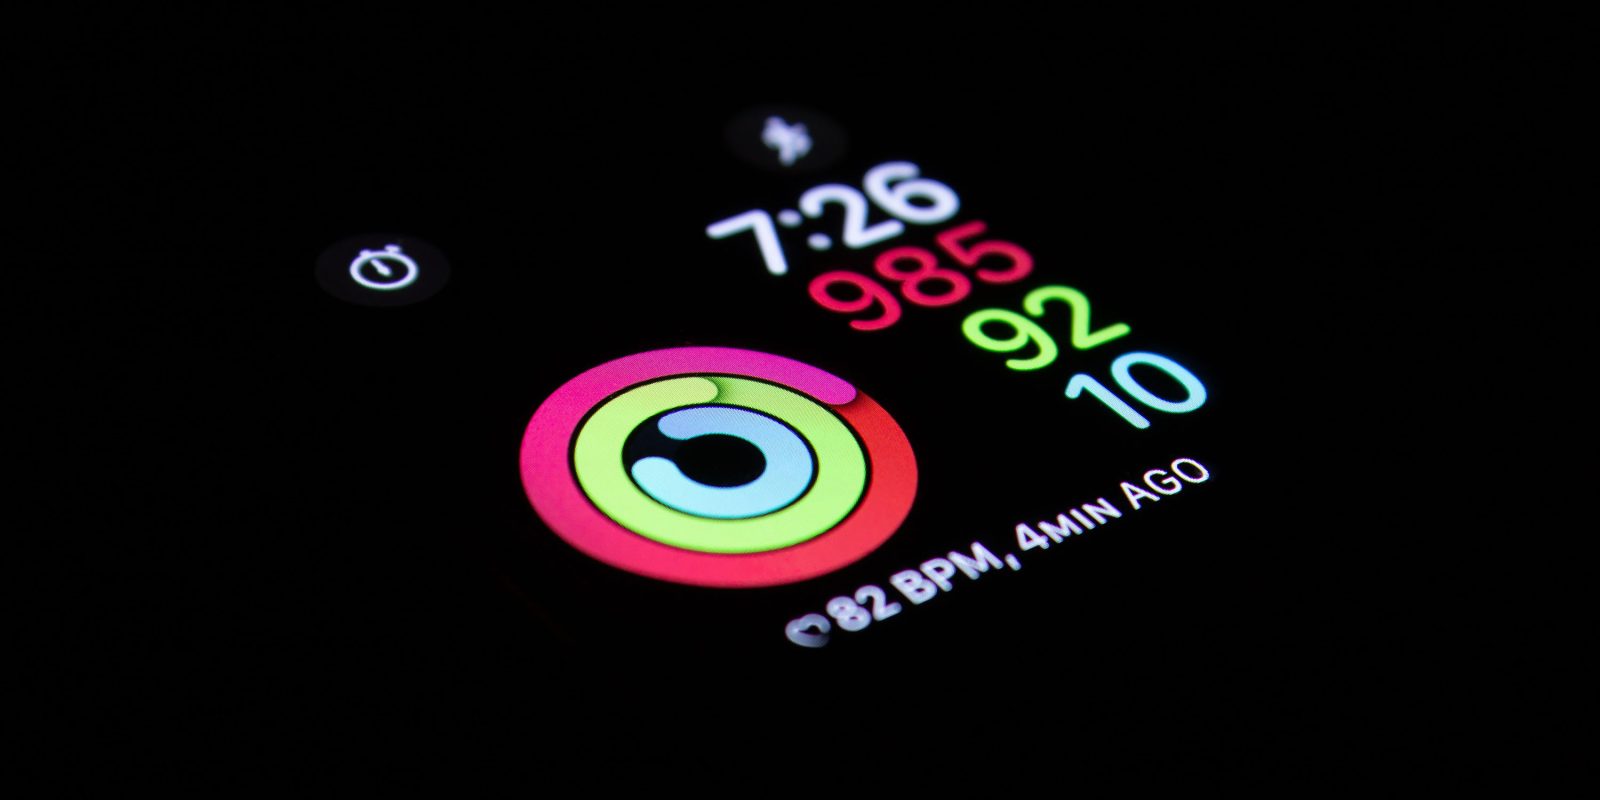 Apple Watch activity rings shown in dark room | Life Itself conference has Apple chairman and health chief in speaker line-up